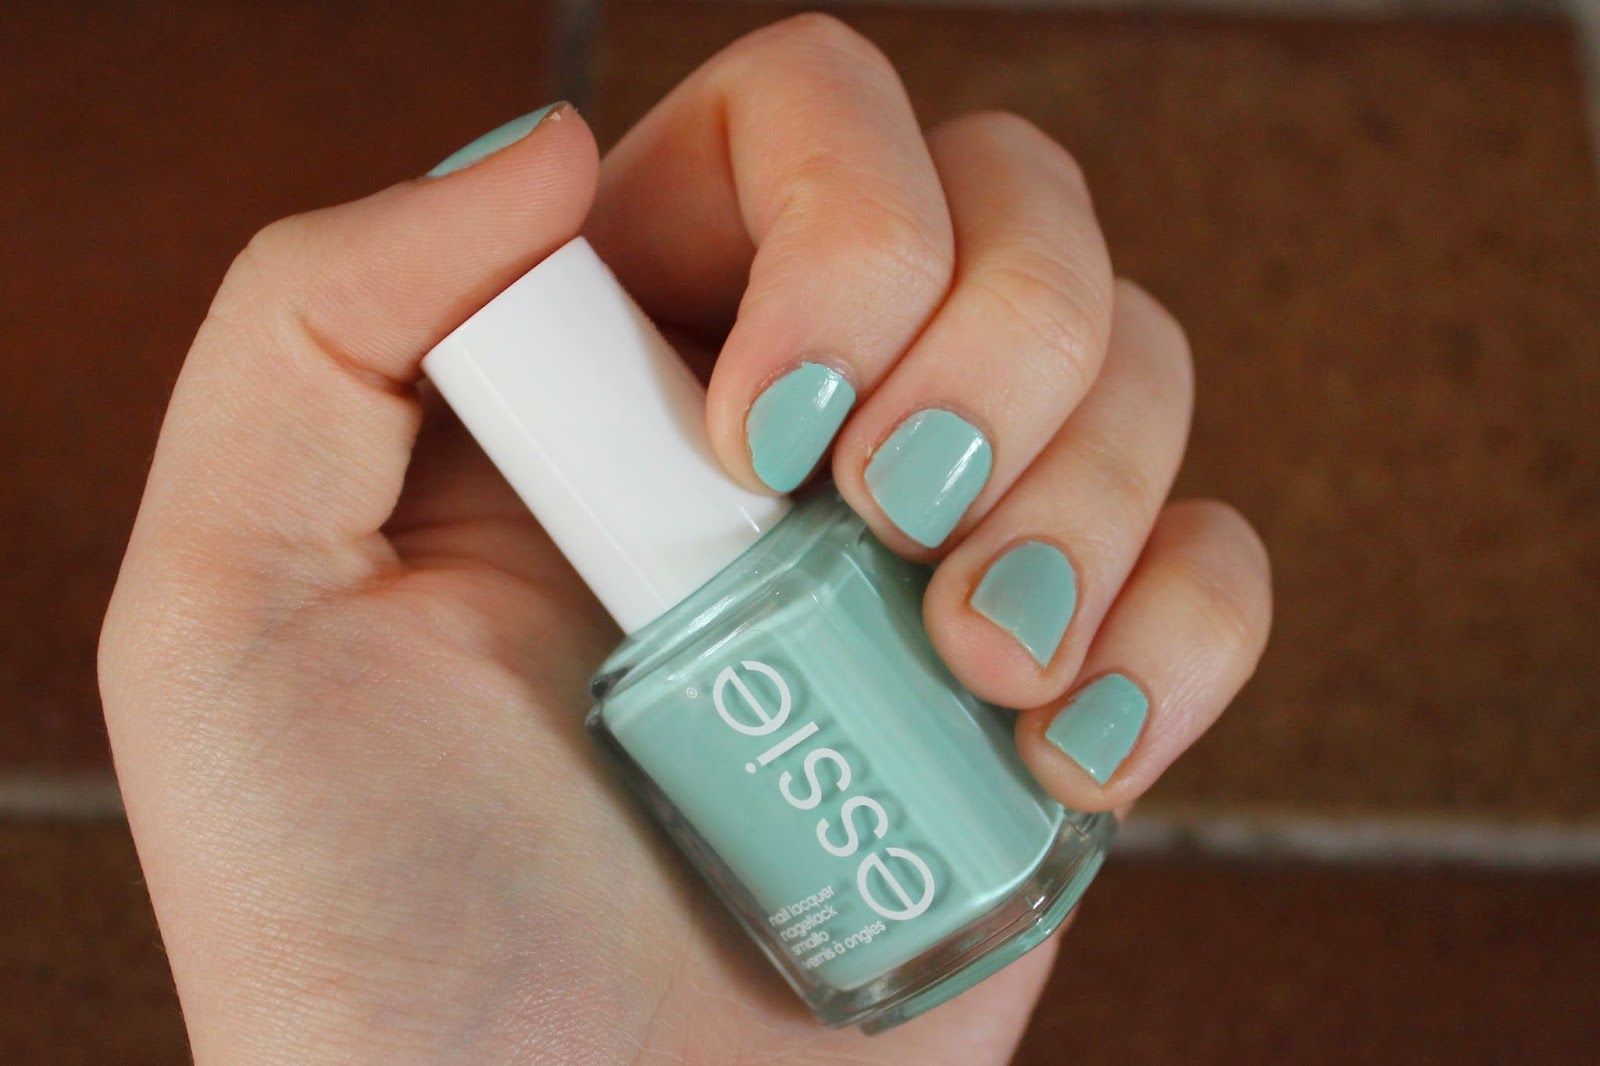 1. "Cotton Candy" Nail Polish by Essie - wide 10